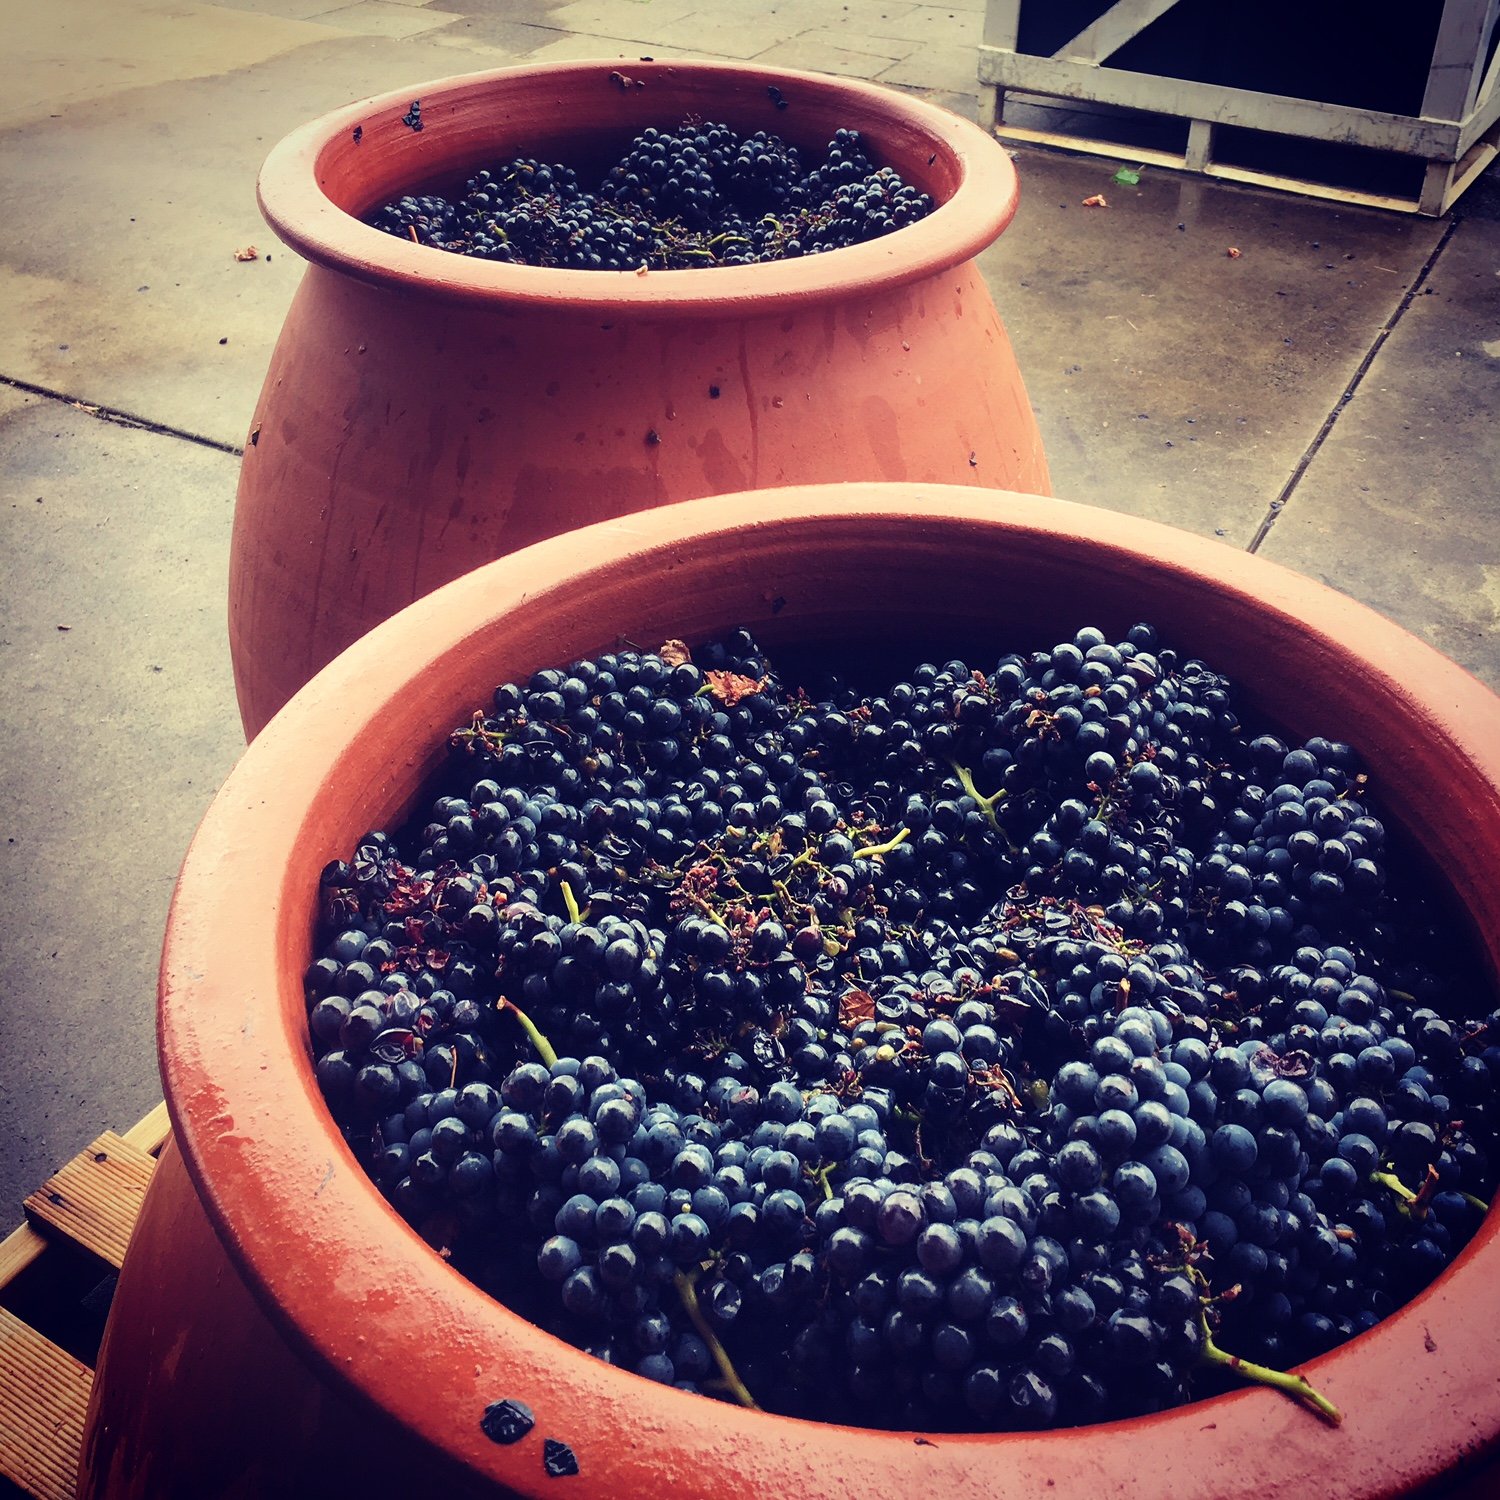 There are many great benefits to using clay amphoras in winemaking: natural micro-oxygenation without added flavors/aromas, temperature regulatioN, to name but a few. AMATO VINO